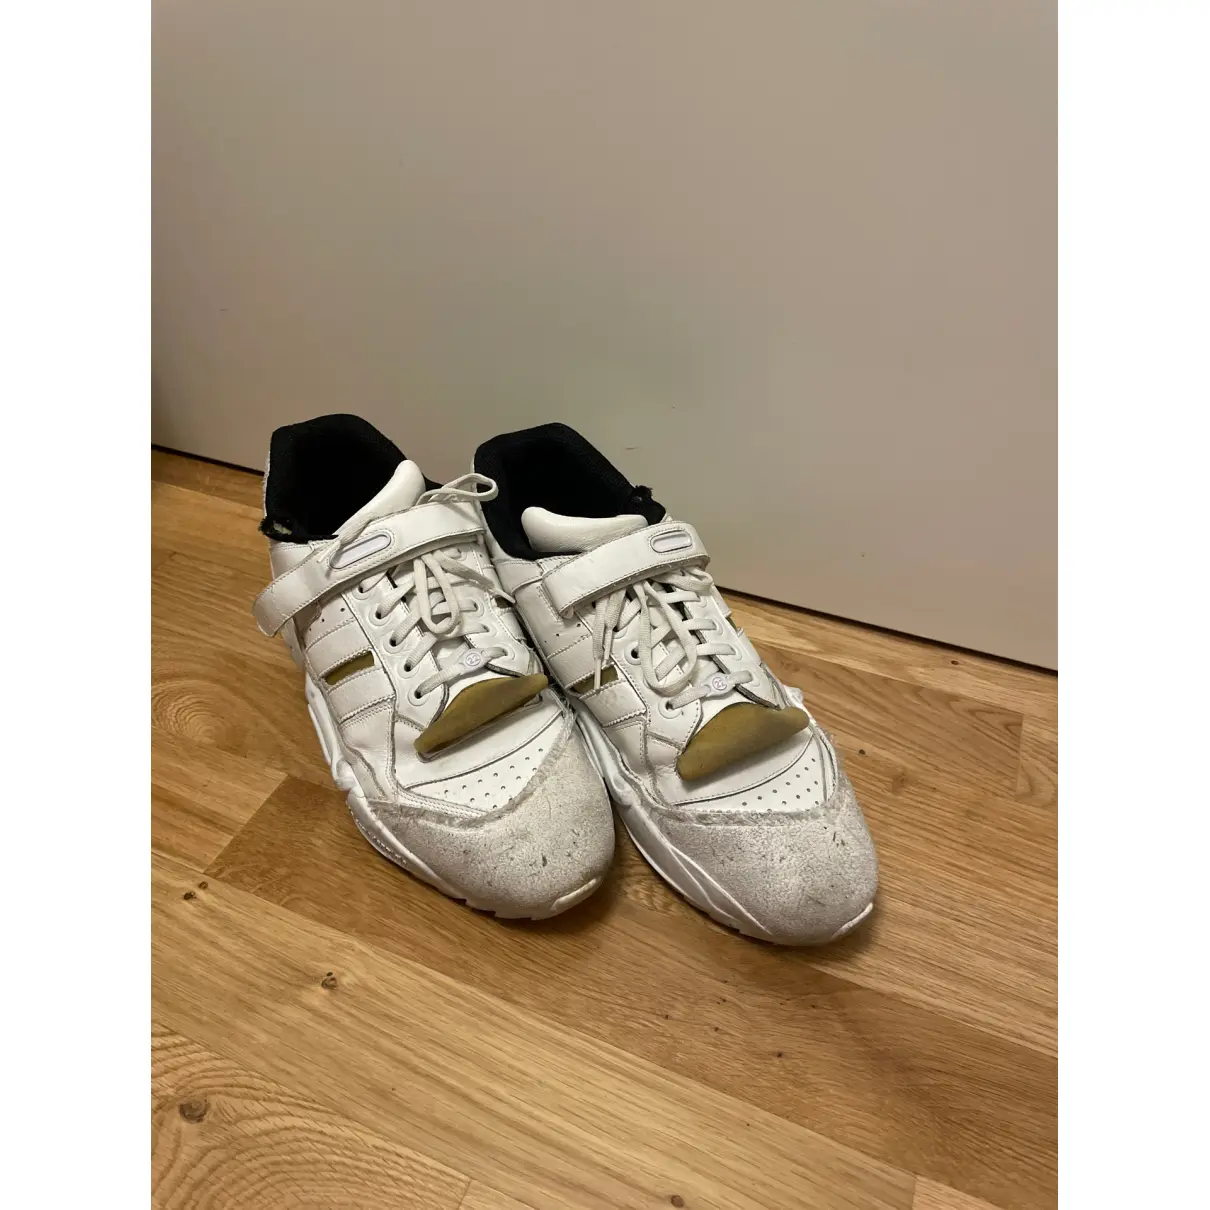 Buy Maison Martin Margiela Leather low trainers online